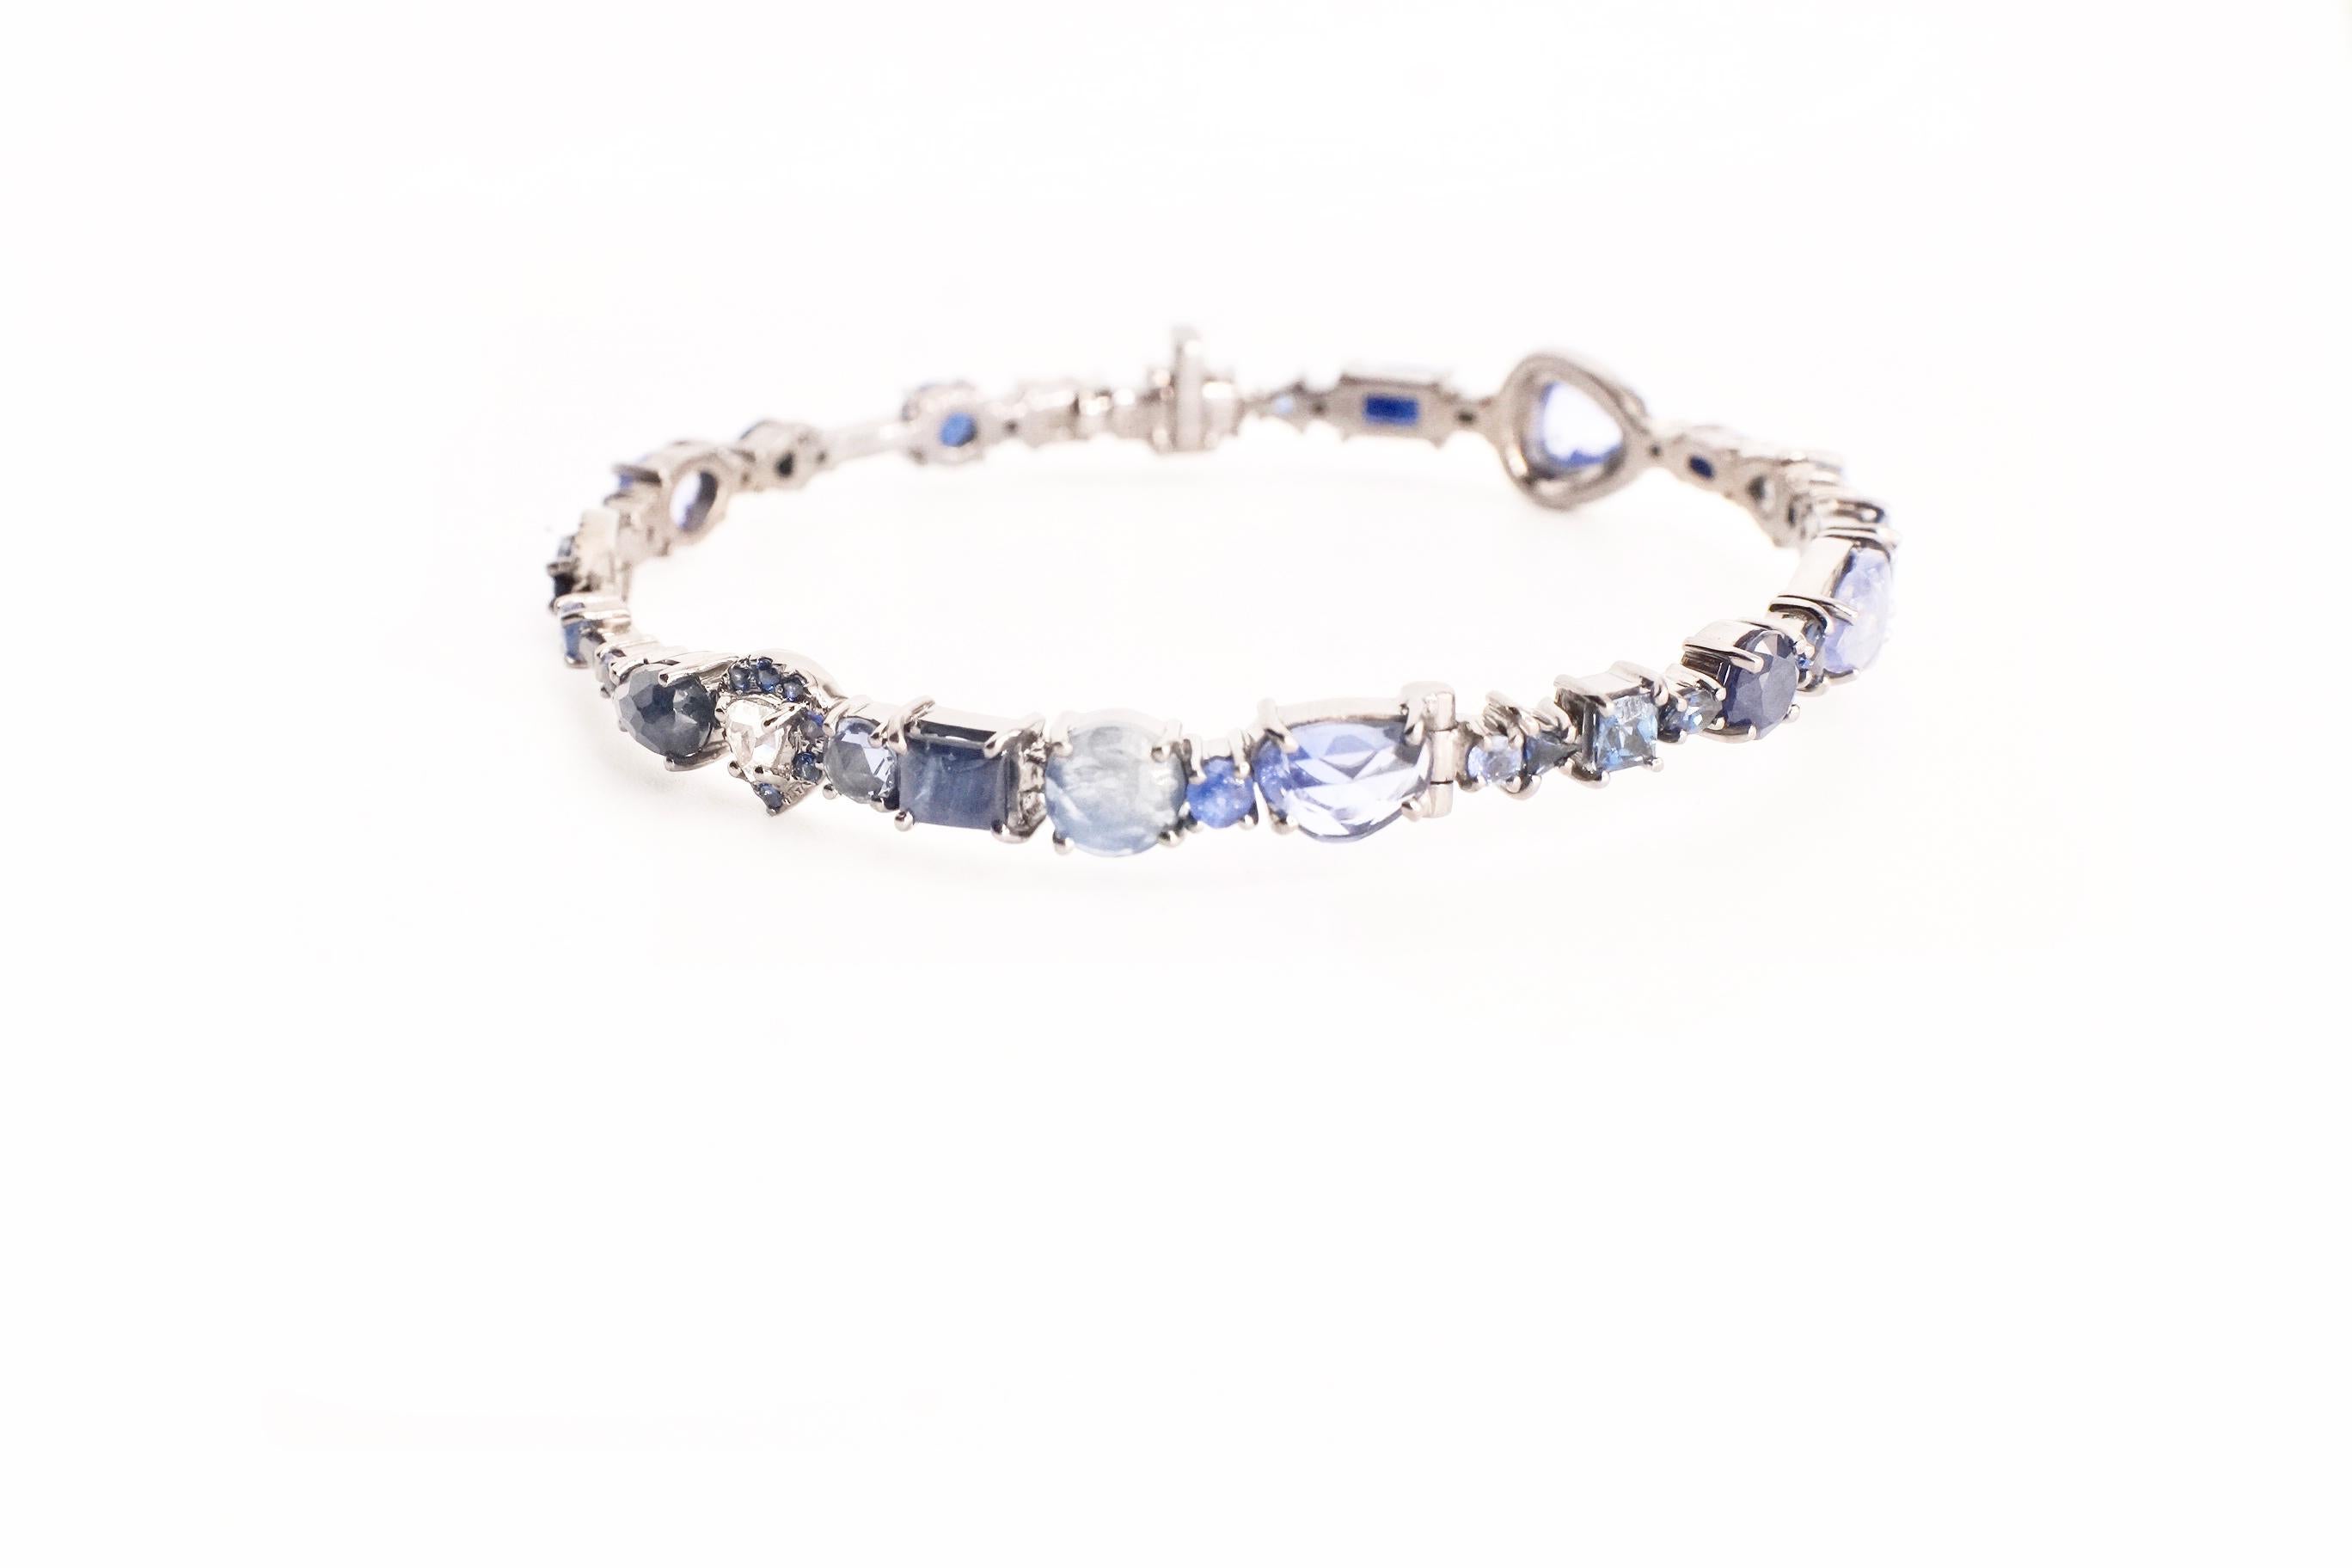 Sapphire Baby Bangle 
An eighteen-karat white gold hinged bangle set entirely with white diamonds and sapphires in a variety of shapes and sizes
Diamond Total Weight – 1.15 cts.
Gemstone Total Weight – 14.29 cts.
This piece is one-of-a-kind and